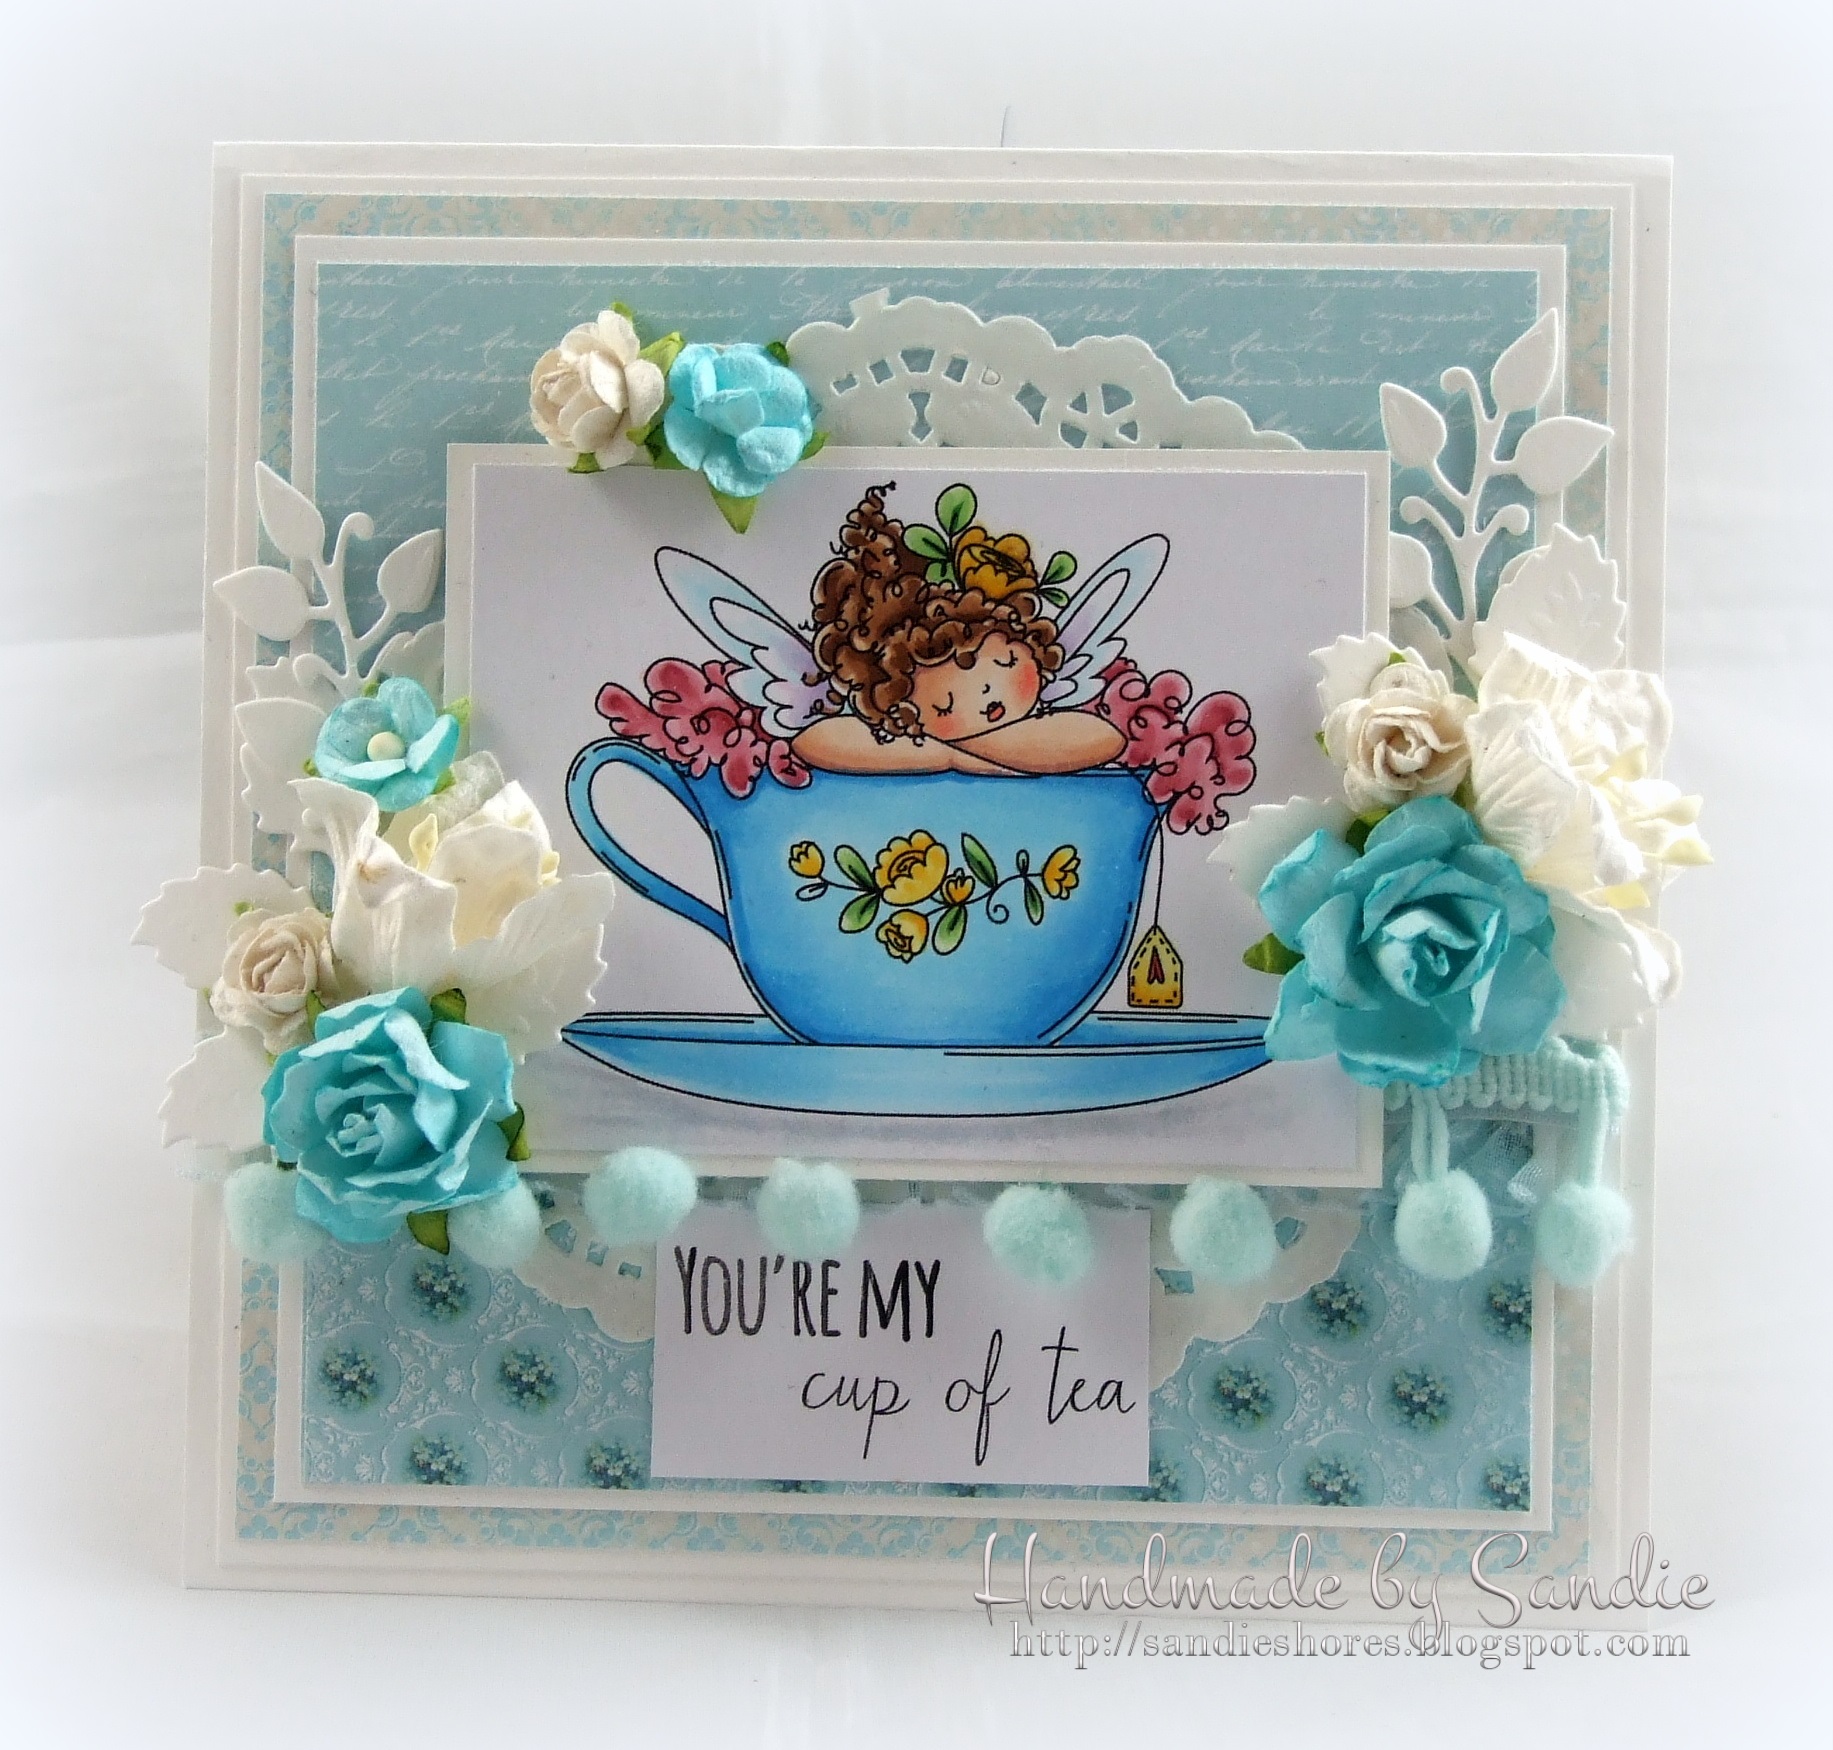 Stamping Bella JANUARY 2017 rubber stamp release-Edna's CUP OF TEA card by Sandie Dunne